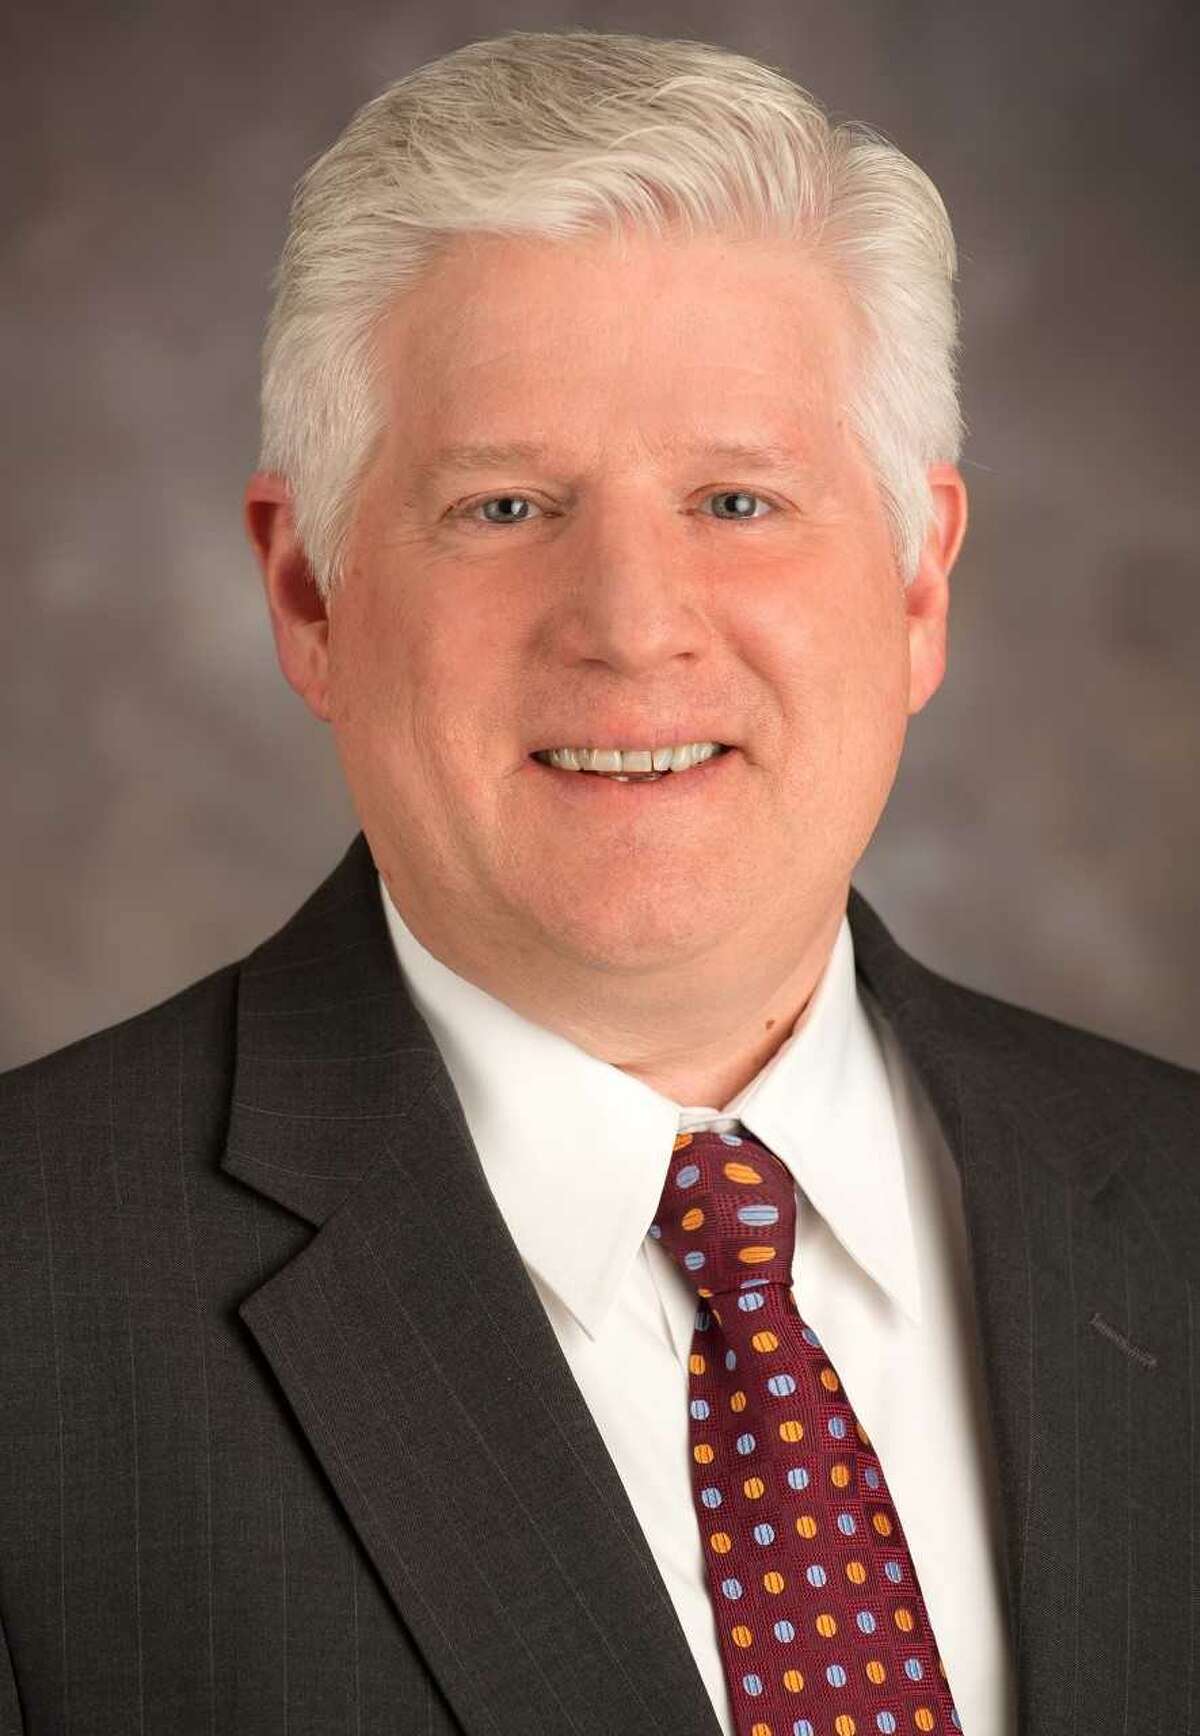 Michael Finegan has been appointed president of acute care for St. Peter's Health Partners.